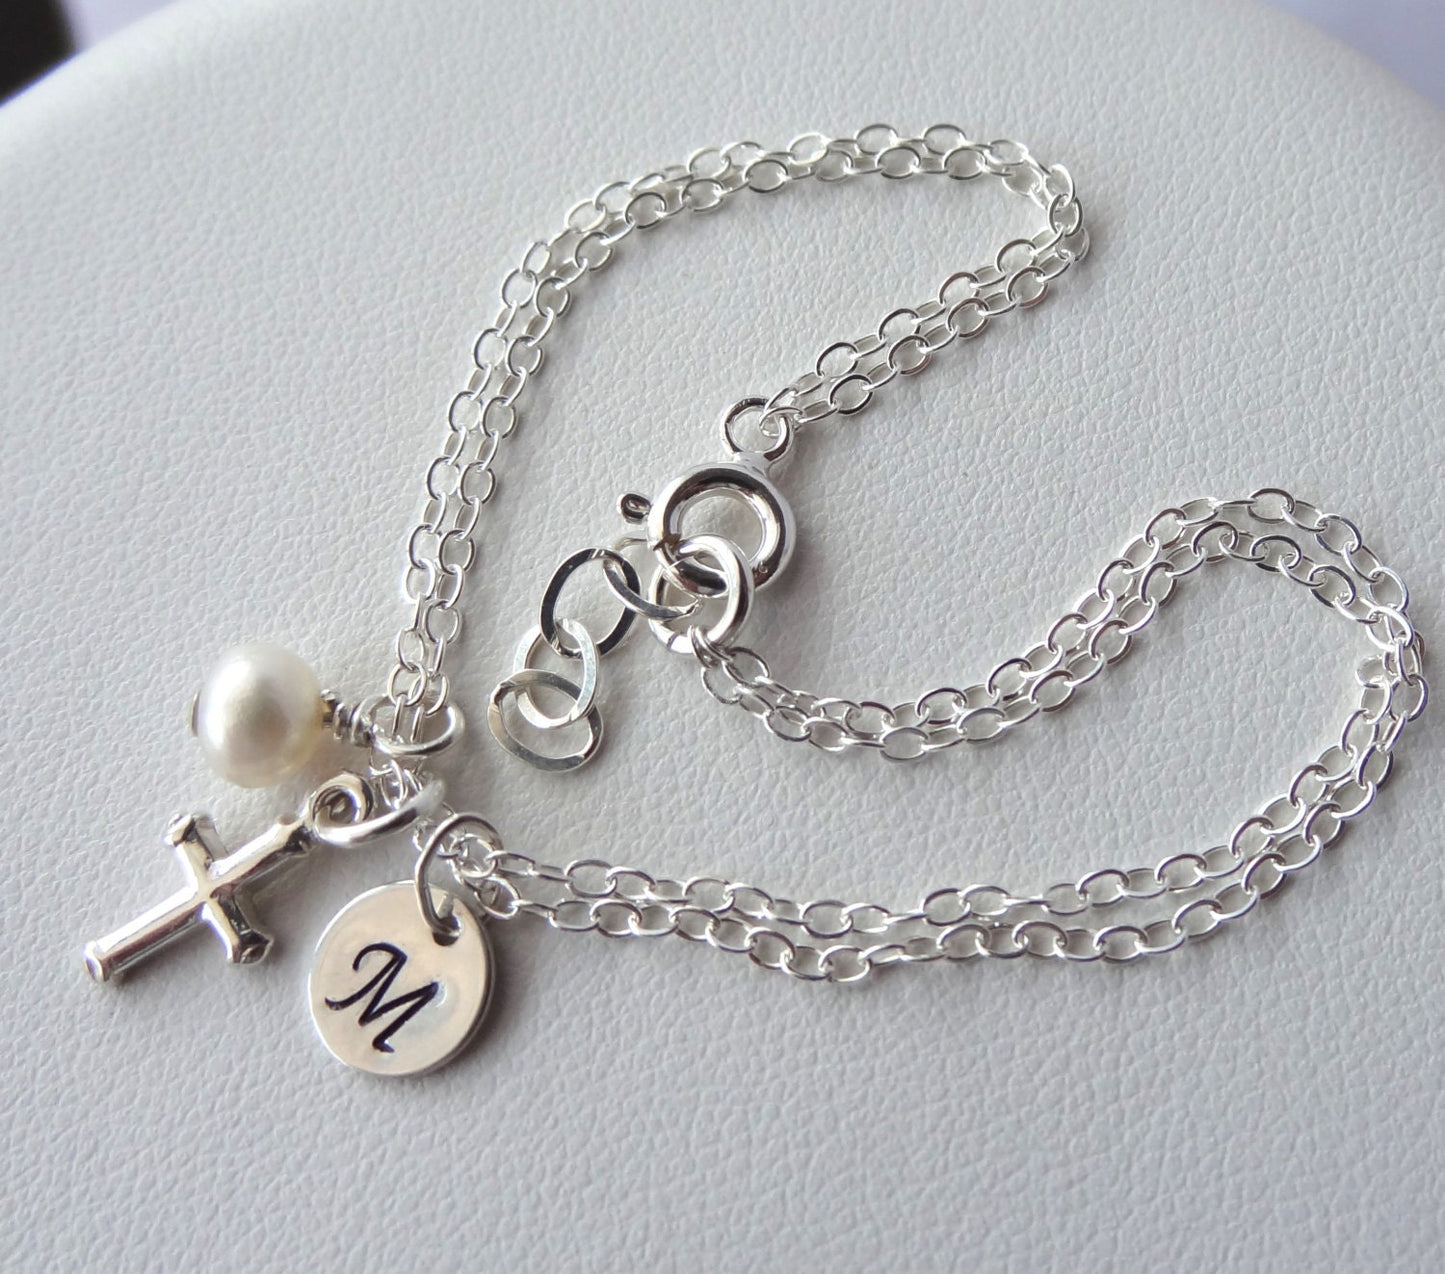 Sterling Silver First Communion Initial Birthstone and Charm Bracelet,Personalized Flower Girls Bracelet,Confirmation Chain Cross Bracelet